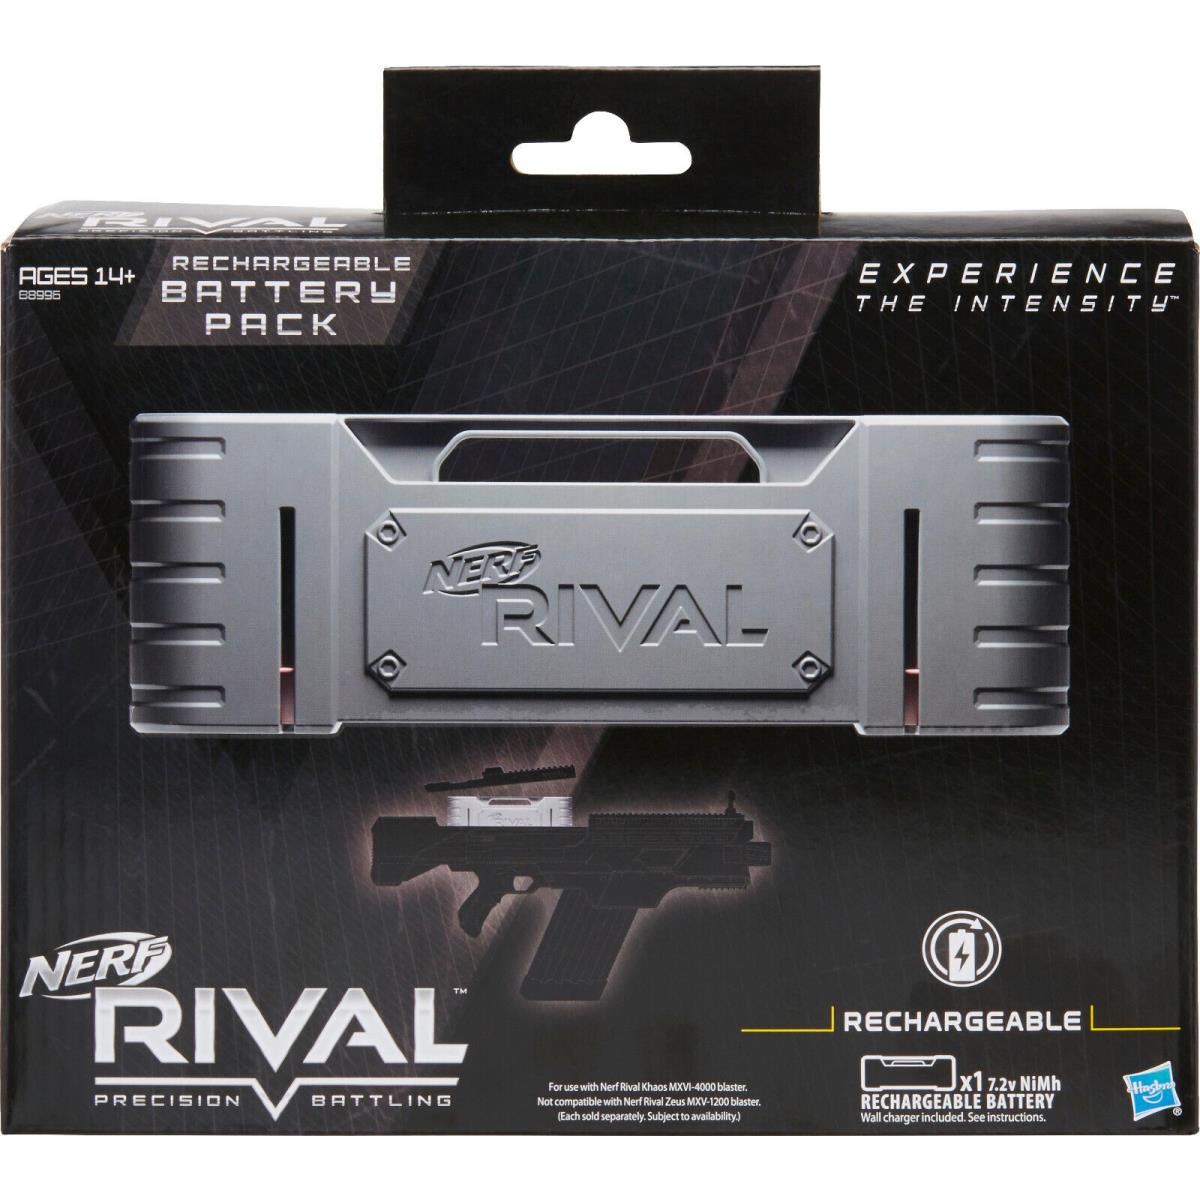 Hasbro Nerf Rival Rechargeable Battery Pack